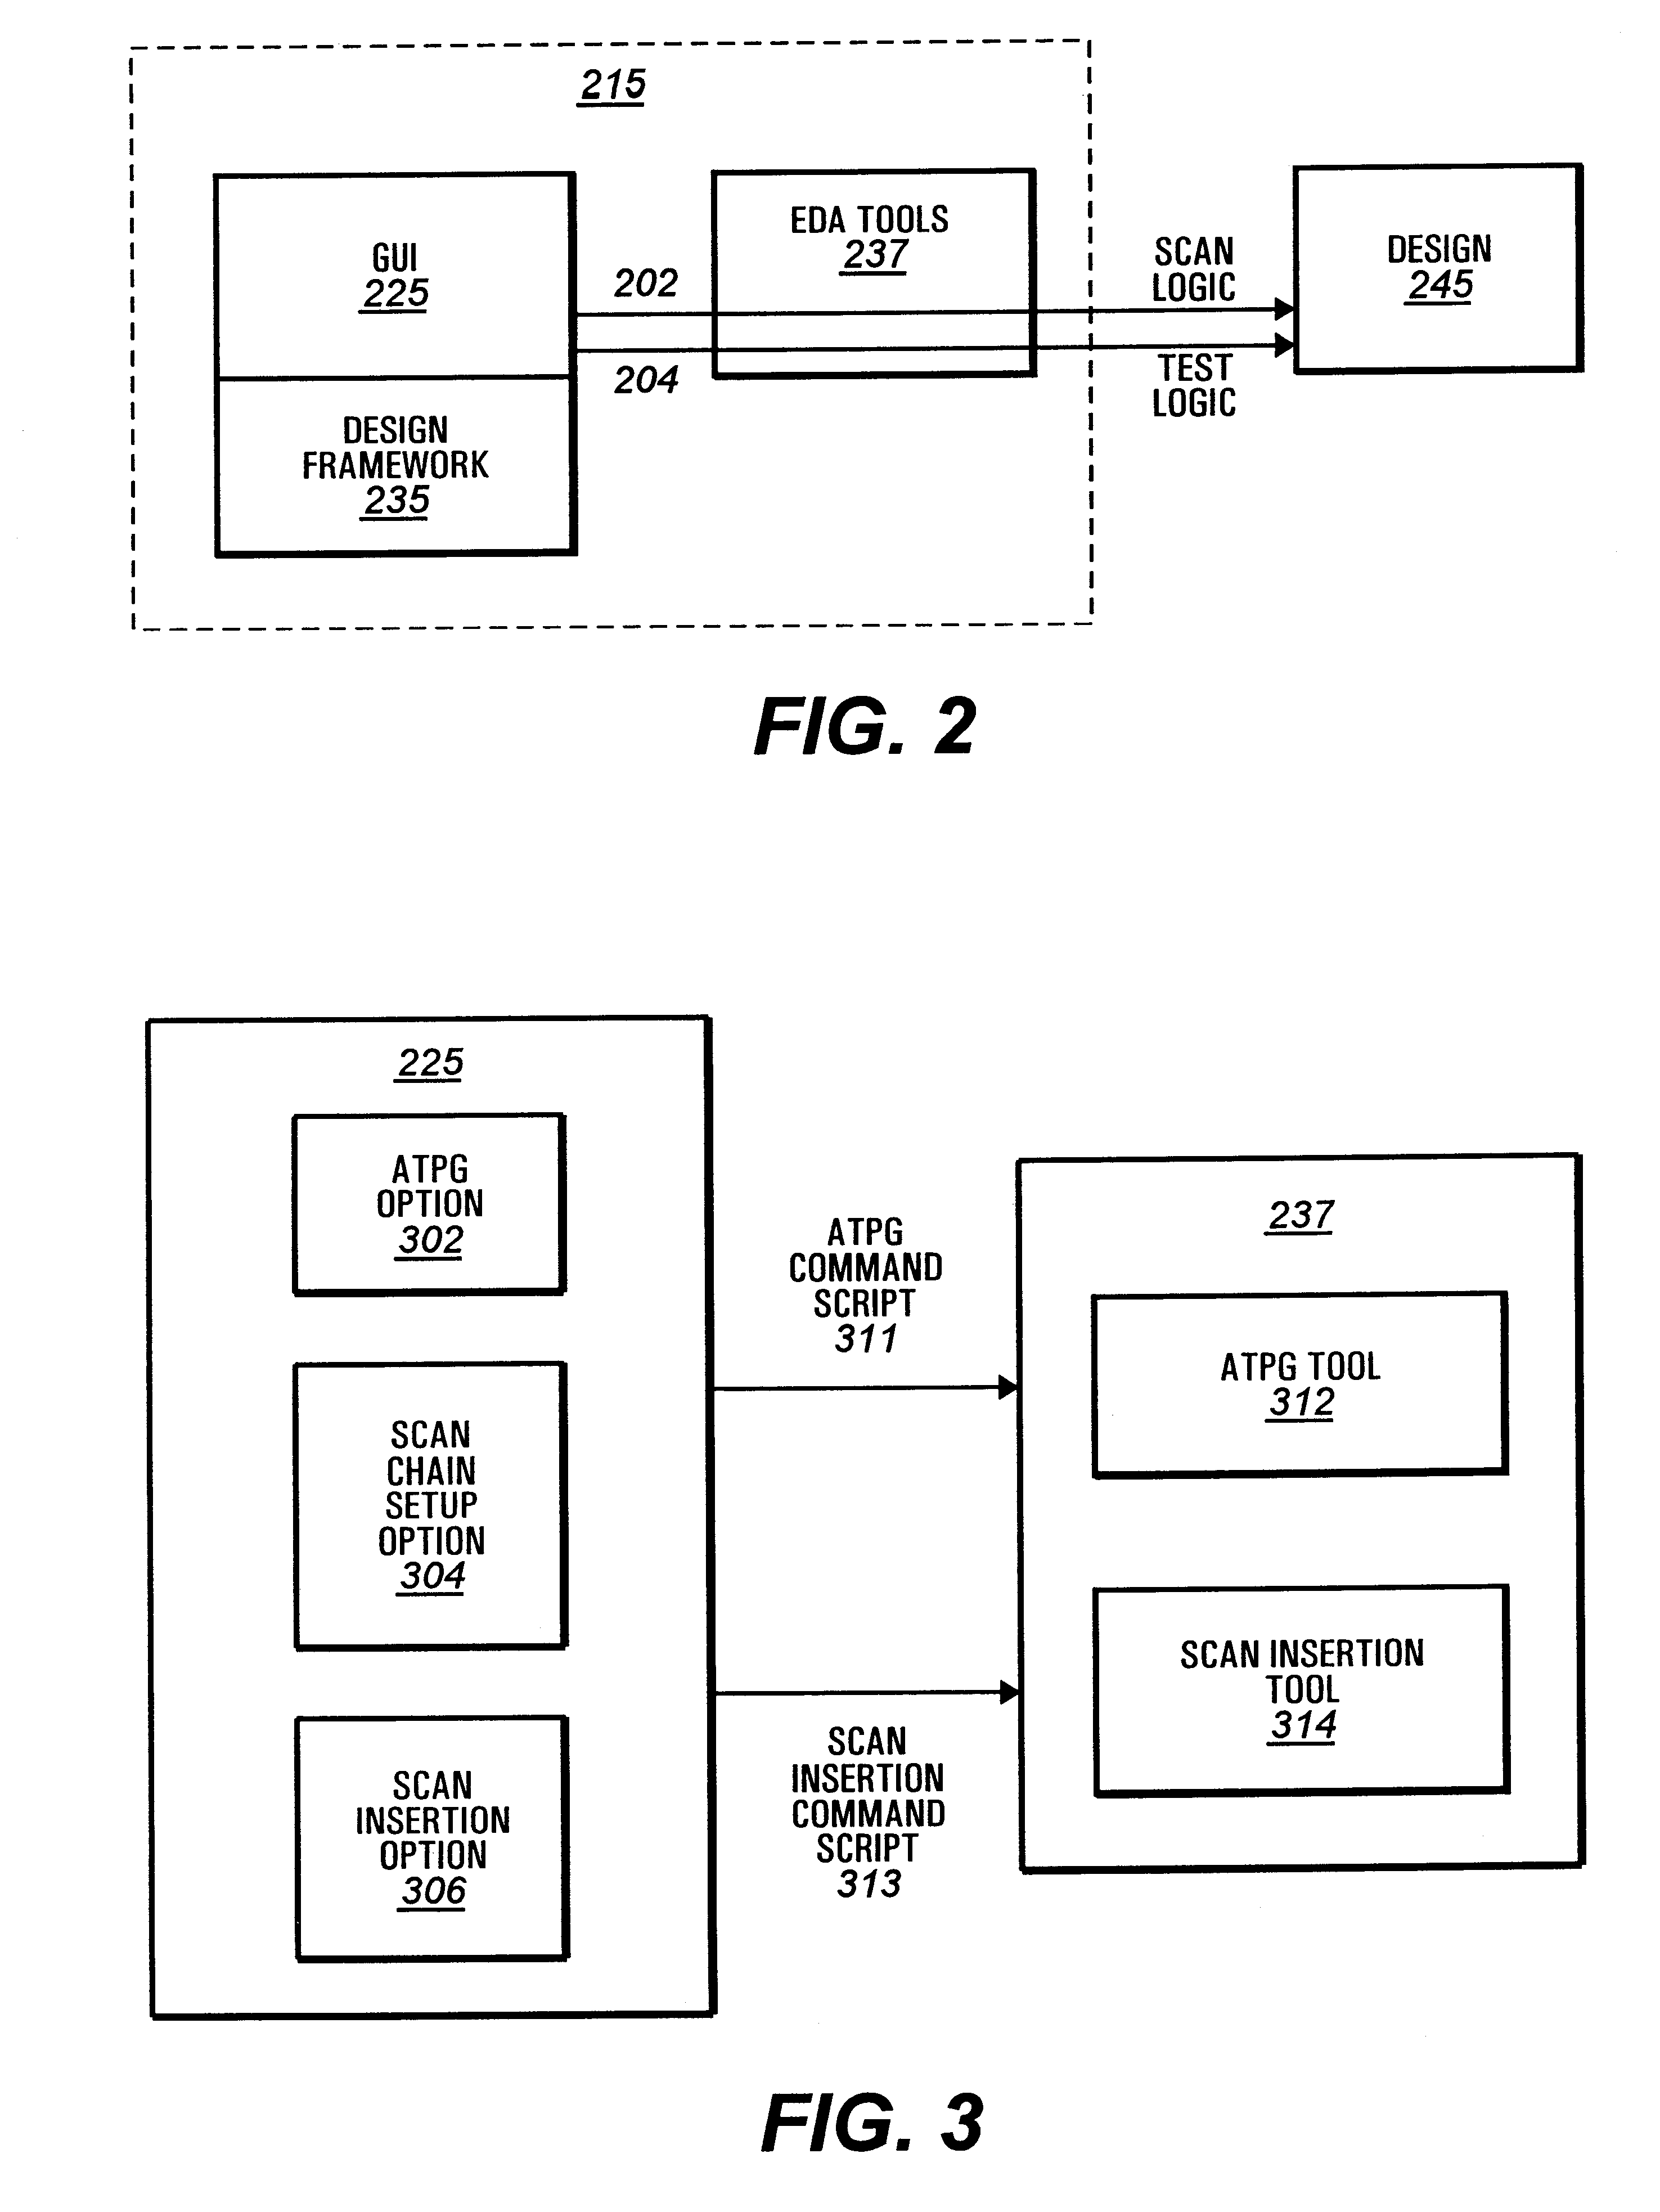 Graphical user interface for testability operation